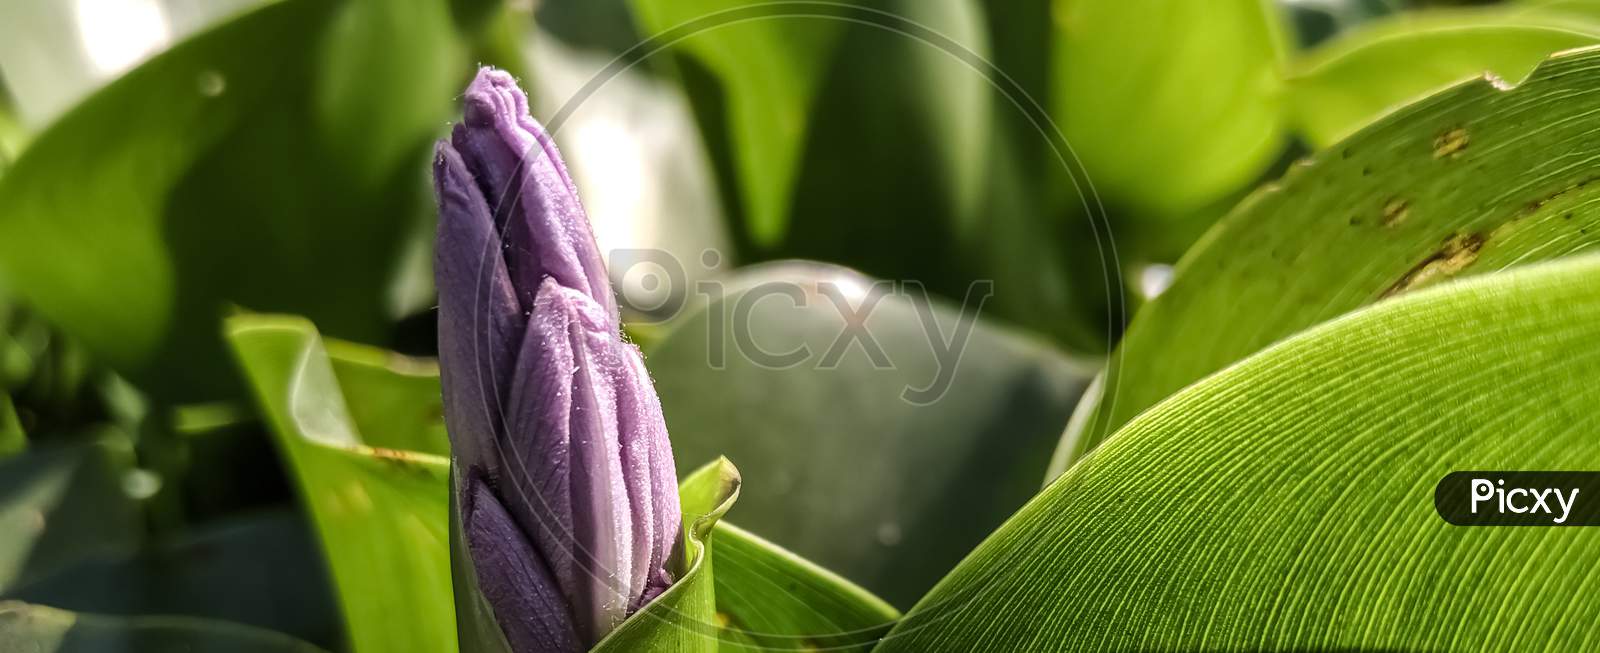 Flower bud of common water hyacinth